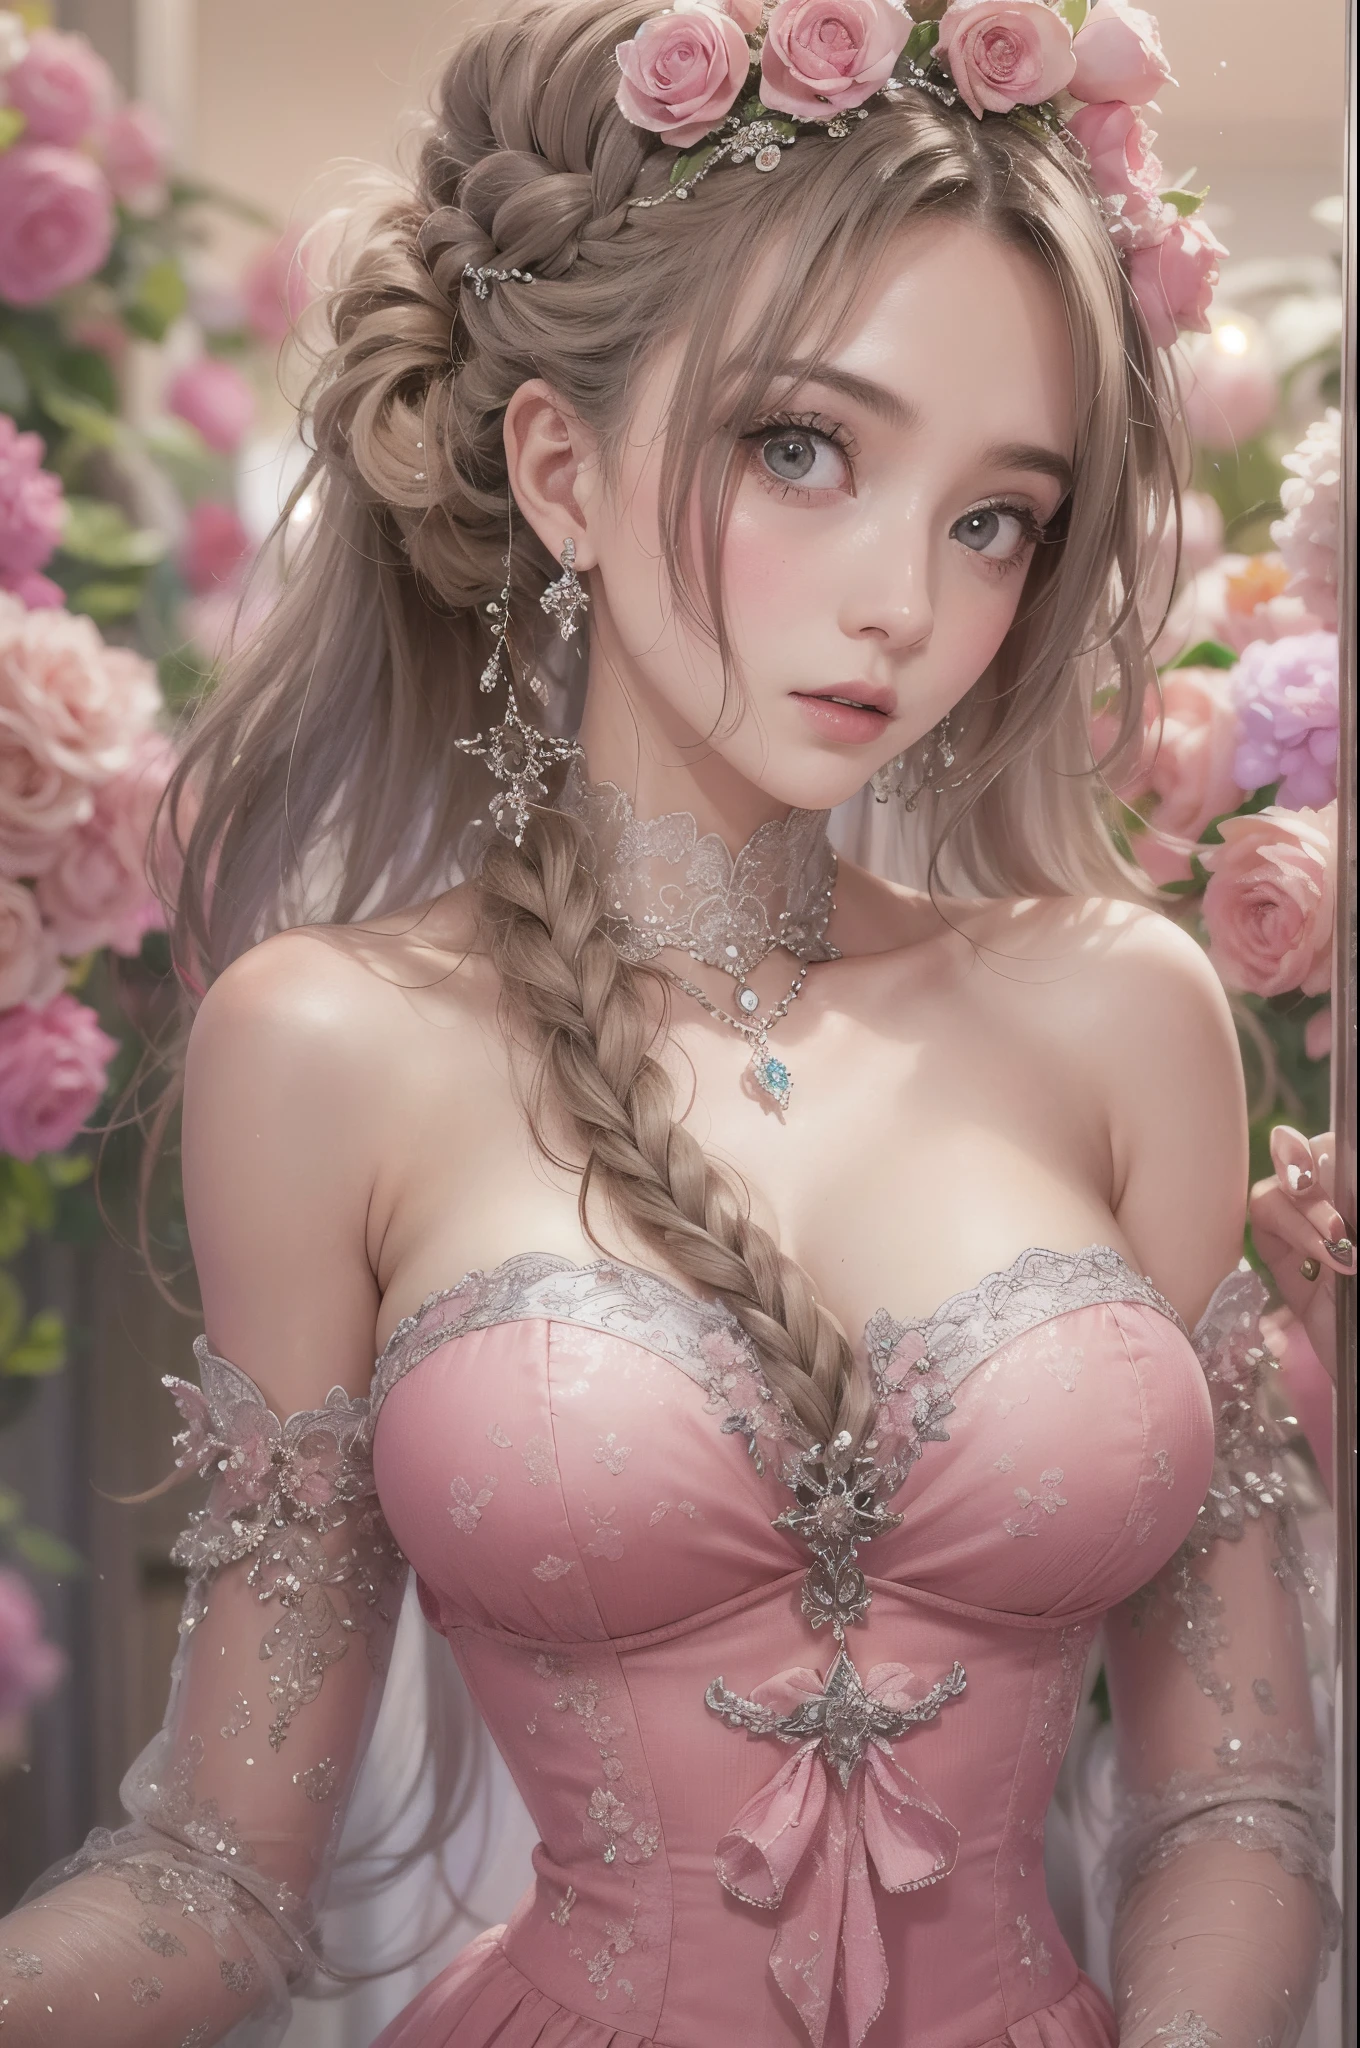 femele, Serious, Elegant, Pink dress, nobles, Element of silver, Long nails, Bare shoulders, hairstyle on, Hair UP, Braids and ponytails, Messy, proud, Absurde, detailed dress, royalty, celebration, Hall decorated with flowers, Cowboy Shot, Portrait, (Best Quality), (masutepiece), (Highly detailed), (4K), Big breasts that are about to burst, Deep cleavage